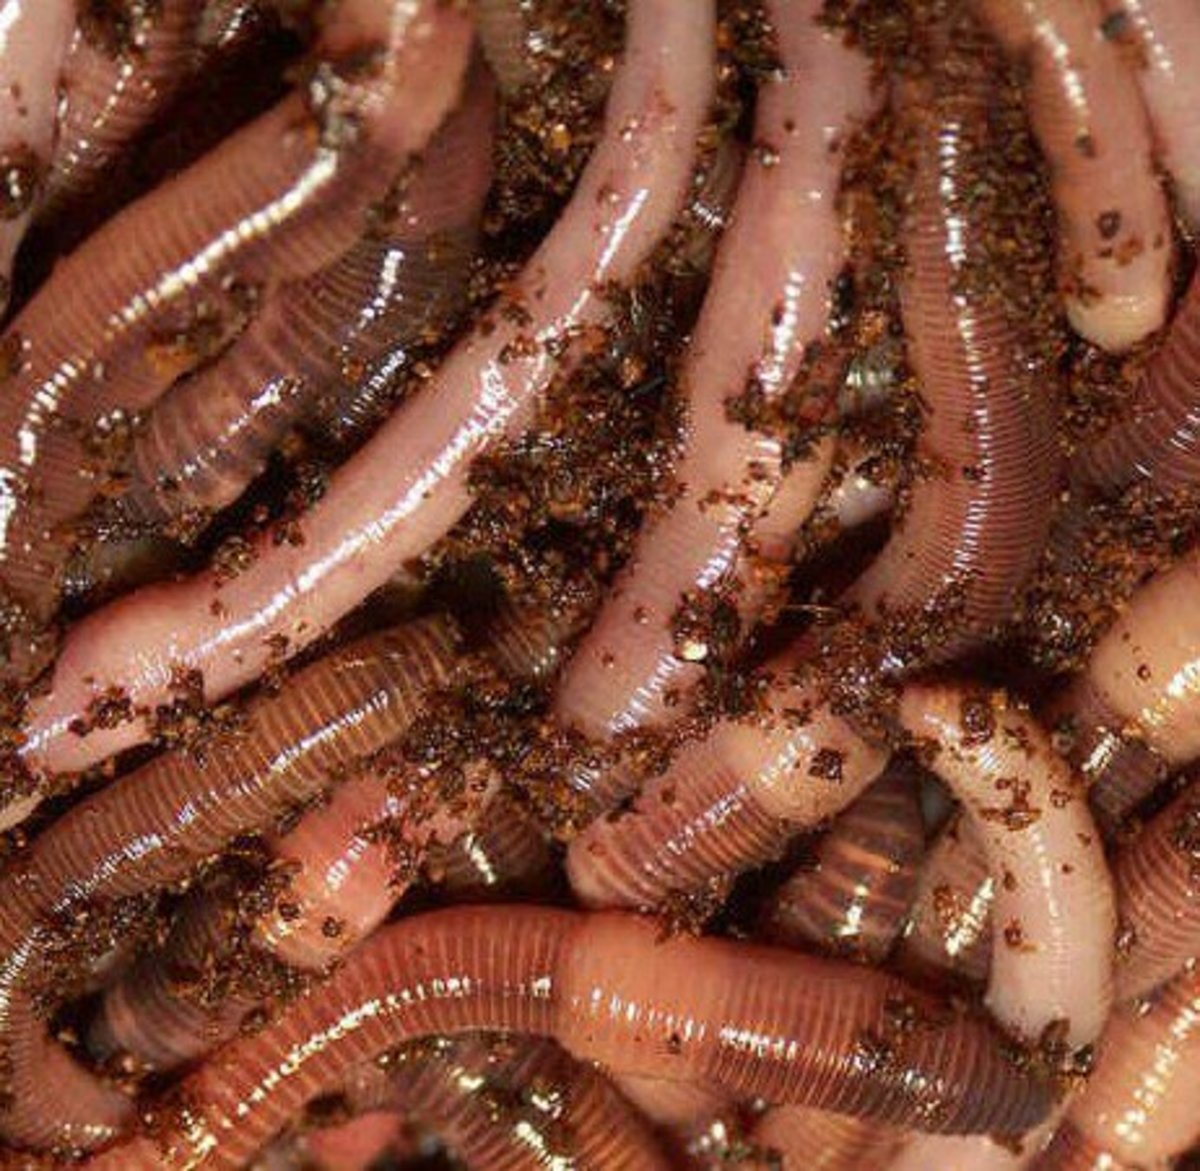 Abating bait: Decline in prized worms threatens way of life